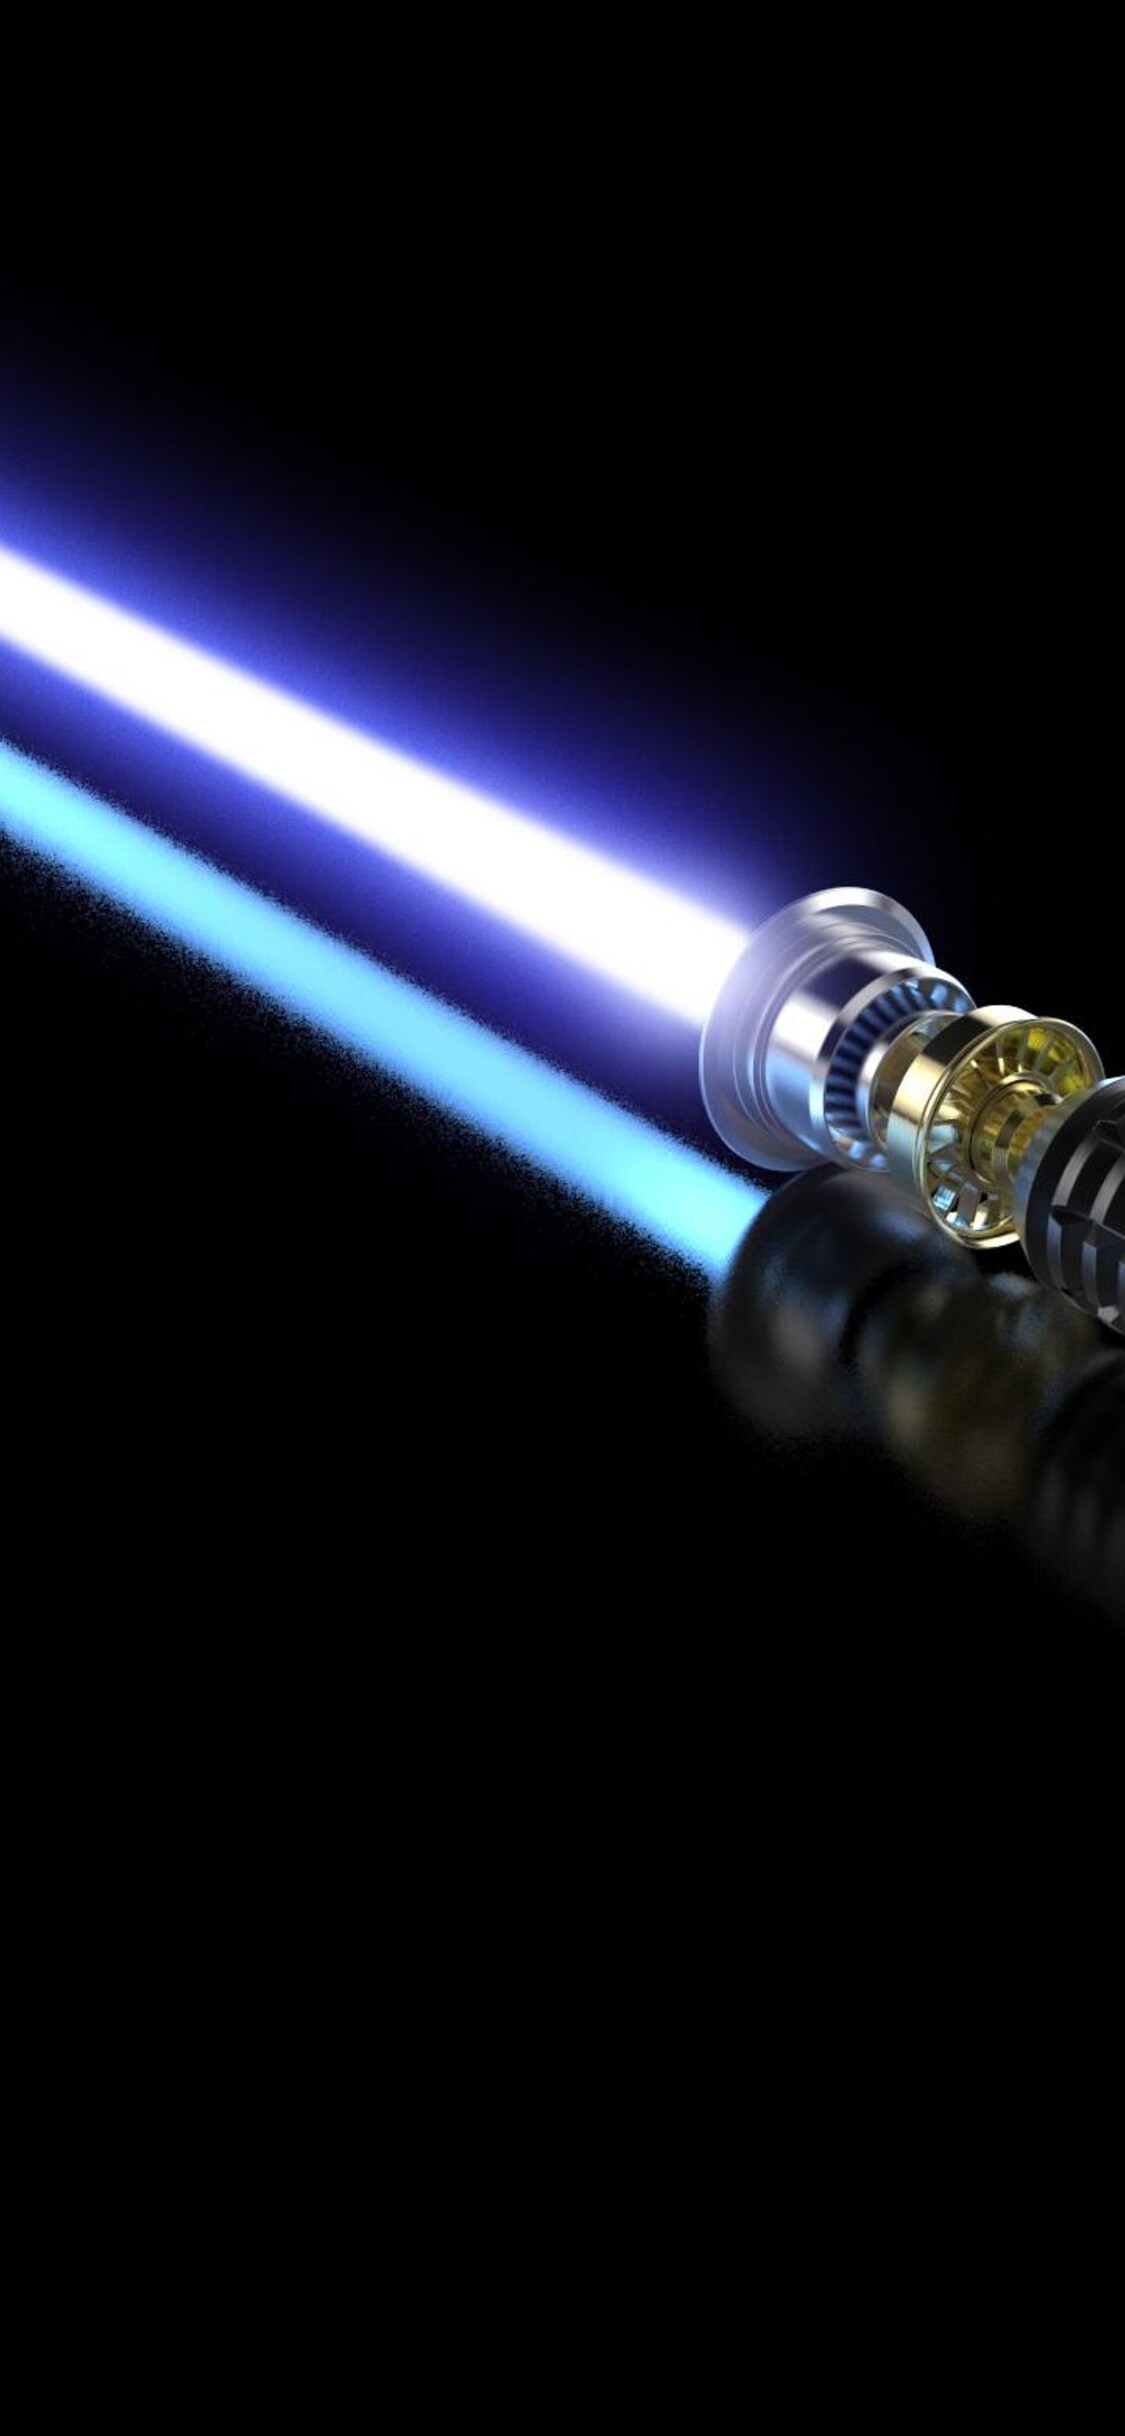 Lightsaber Star Wars iPhone XS, iPhone iPhone X HD 4k Wallpaper, Image, Background, Photo and Picture